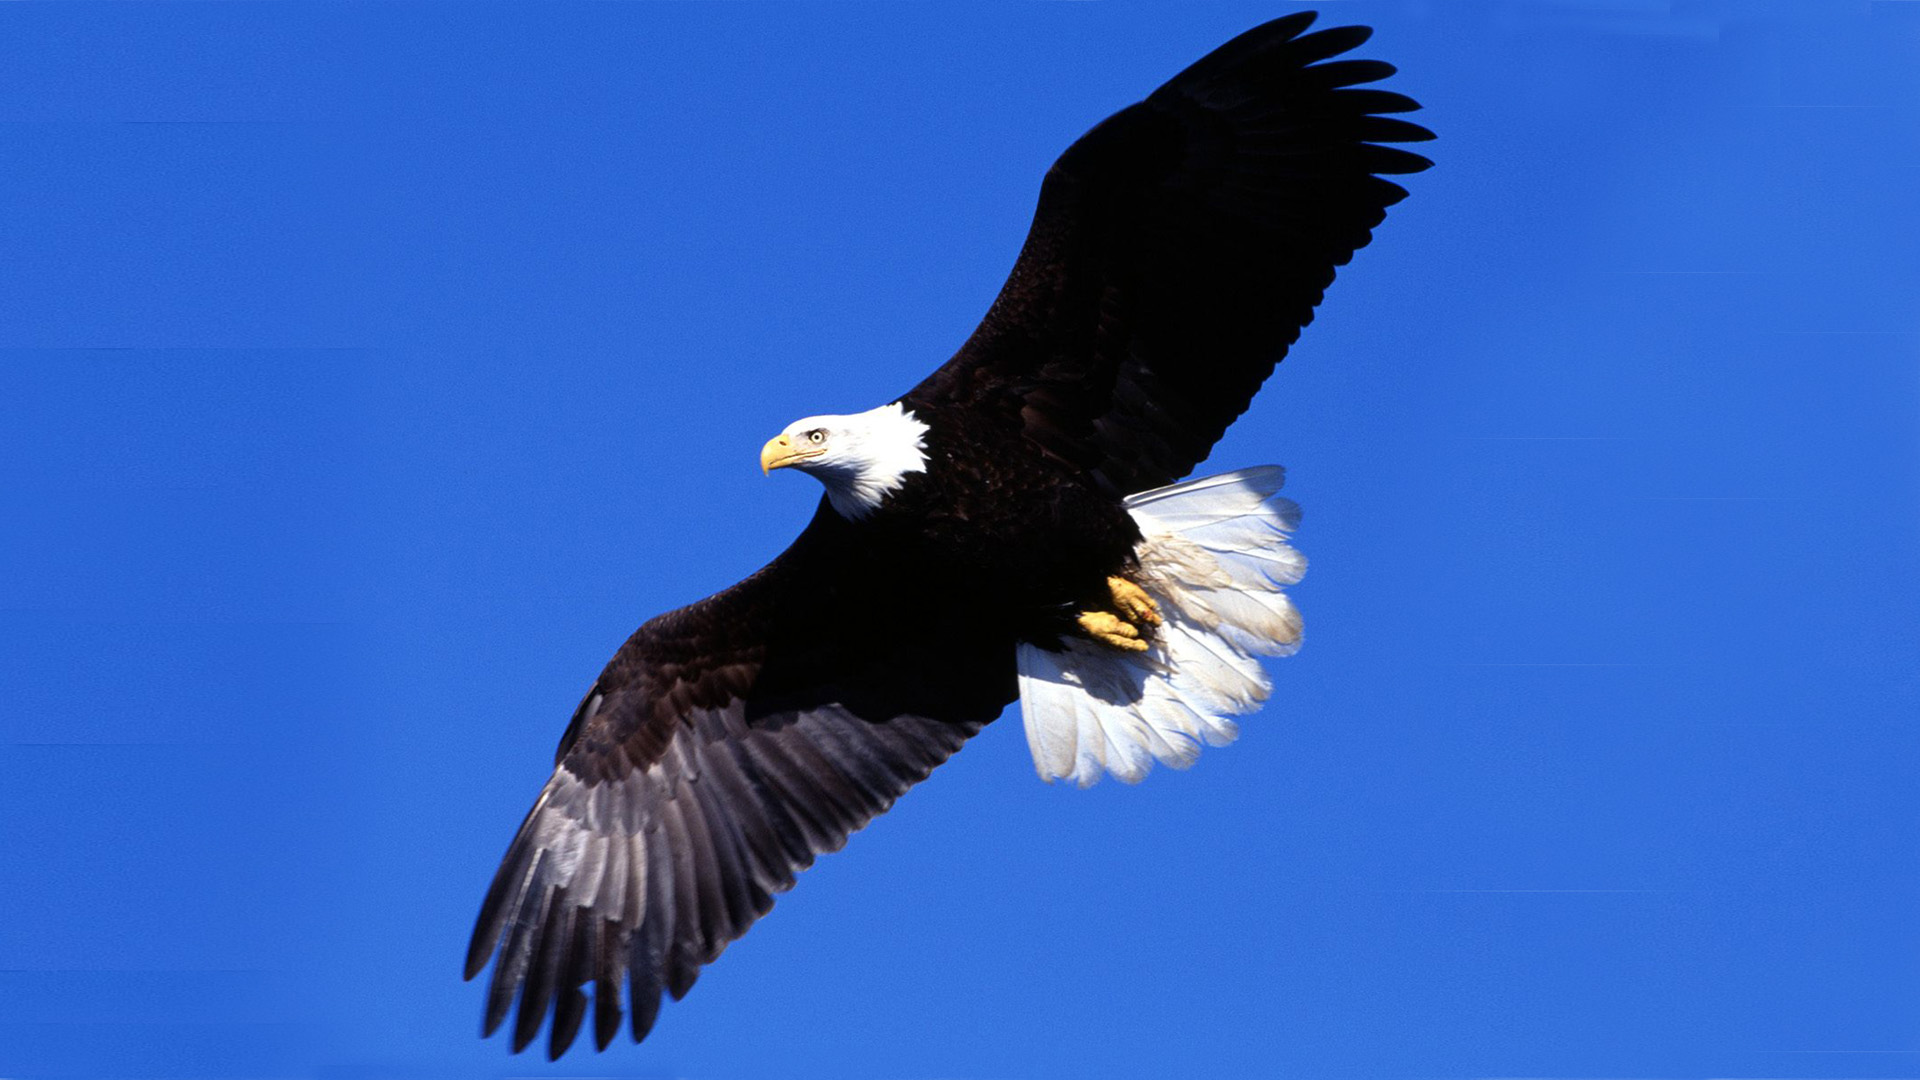 Bald Eagle Flying In The Sky Full Hd Wallpapers-1920x1080 ...